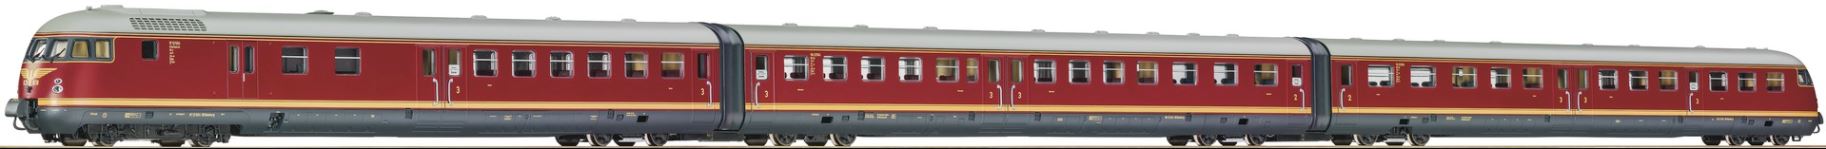 Roco 63133 H0 Diesel Multiple Unit Type VT 12.5, Ep III DB, With Sound